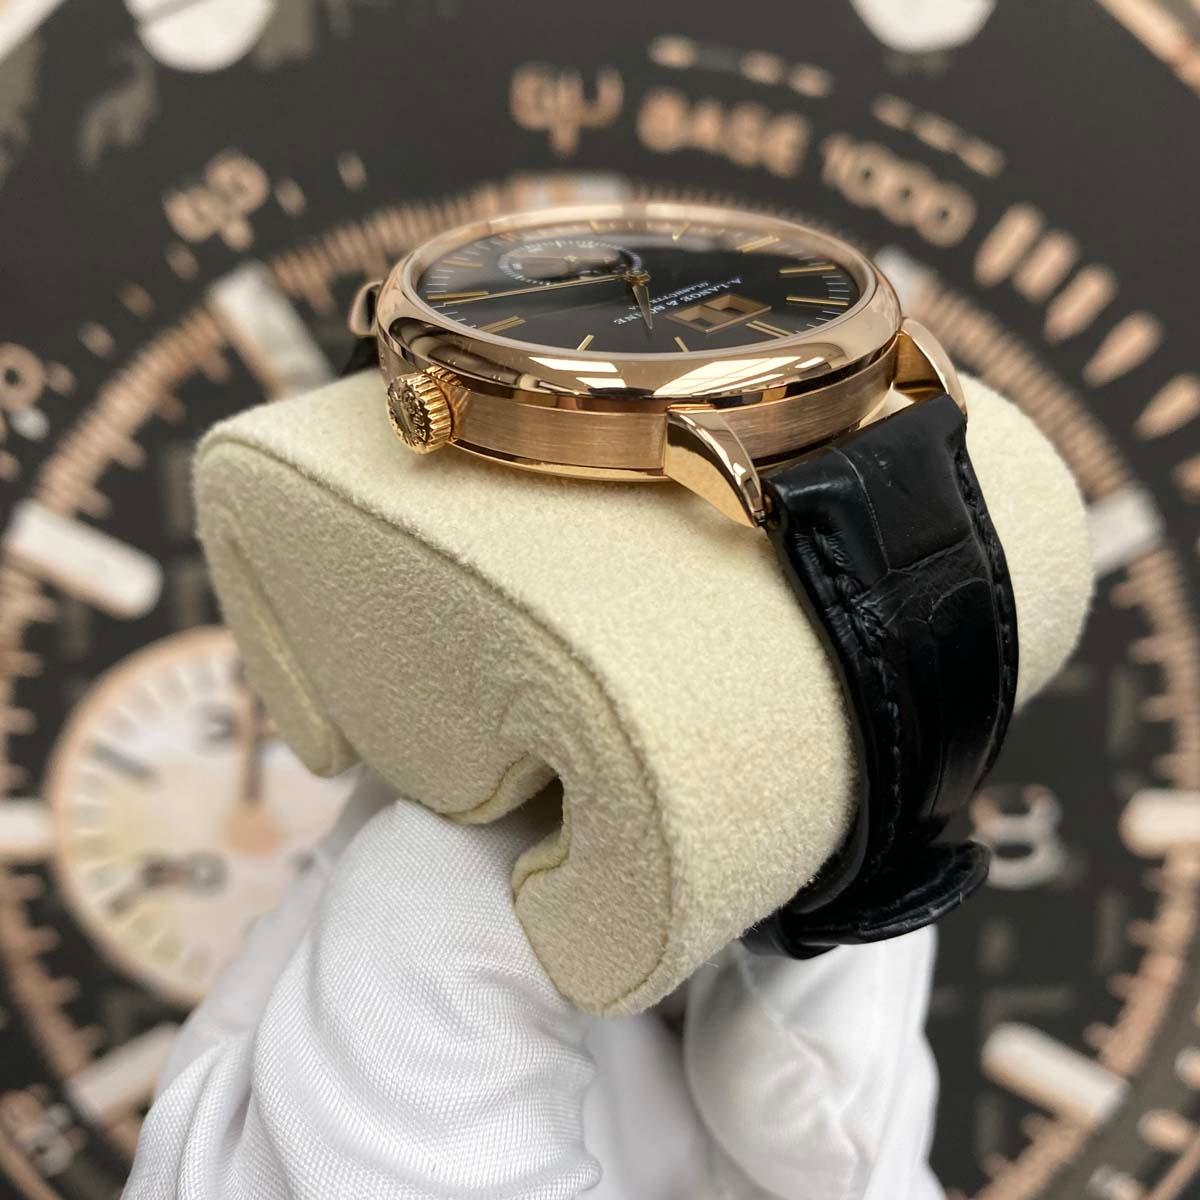 A. Lange & Sohne Saxonia Boutique Exclusive 18kt Rose Gold Moon Phase Automatic 384.031 Black Dial Pre-Owned - Gotham Trading 